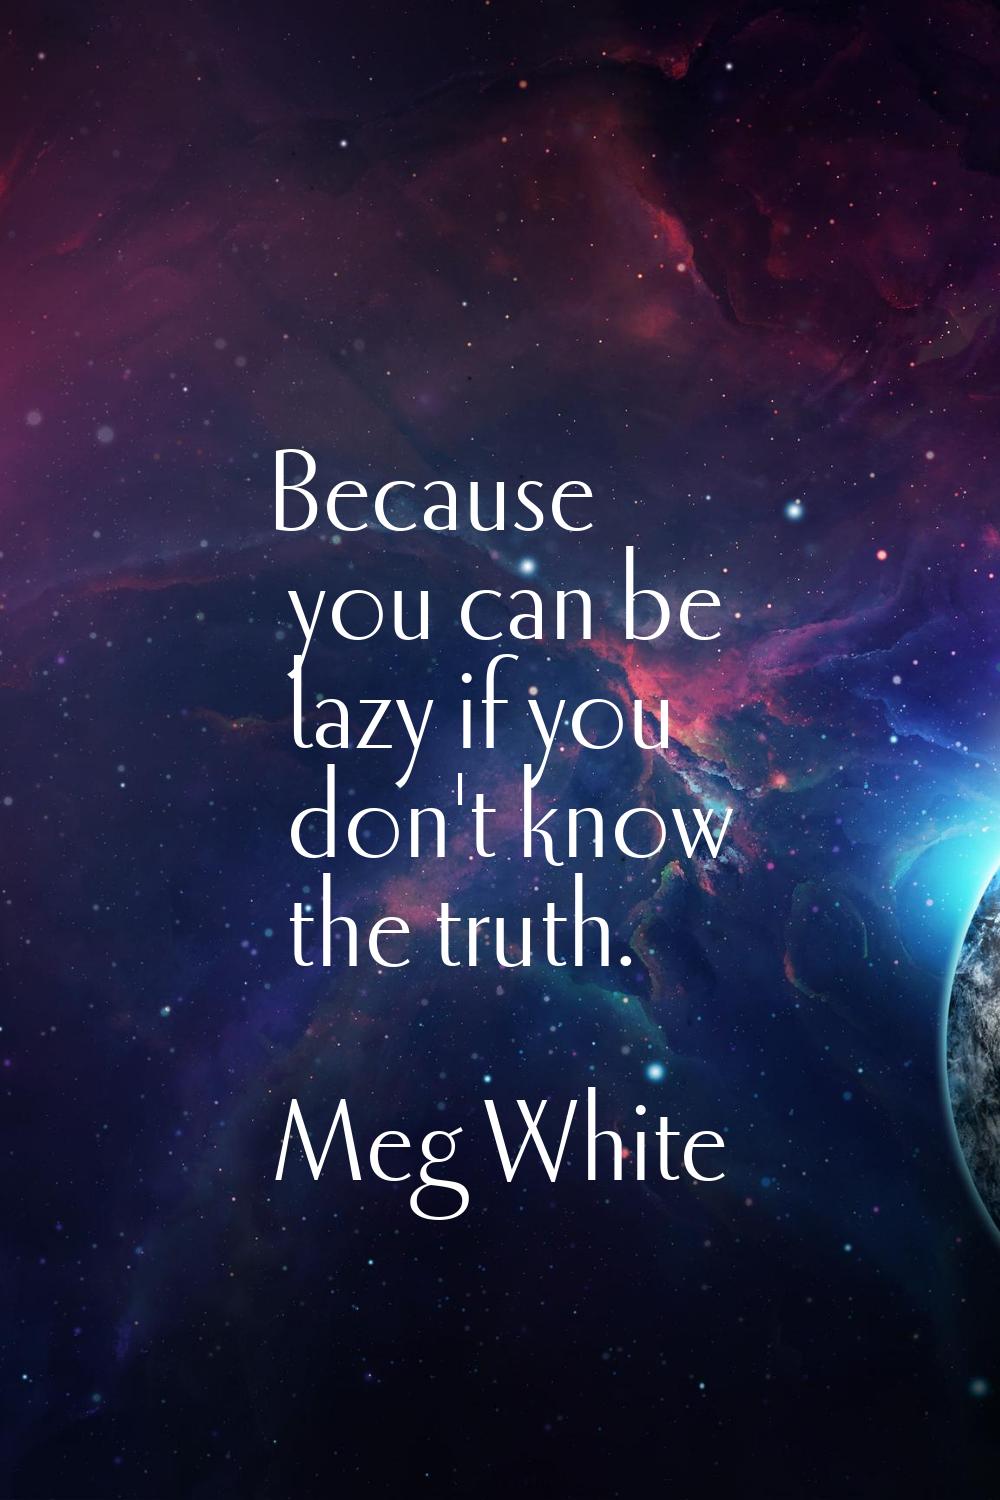 Because you can be lazy if you don't know the truth.